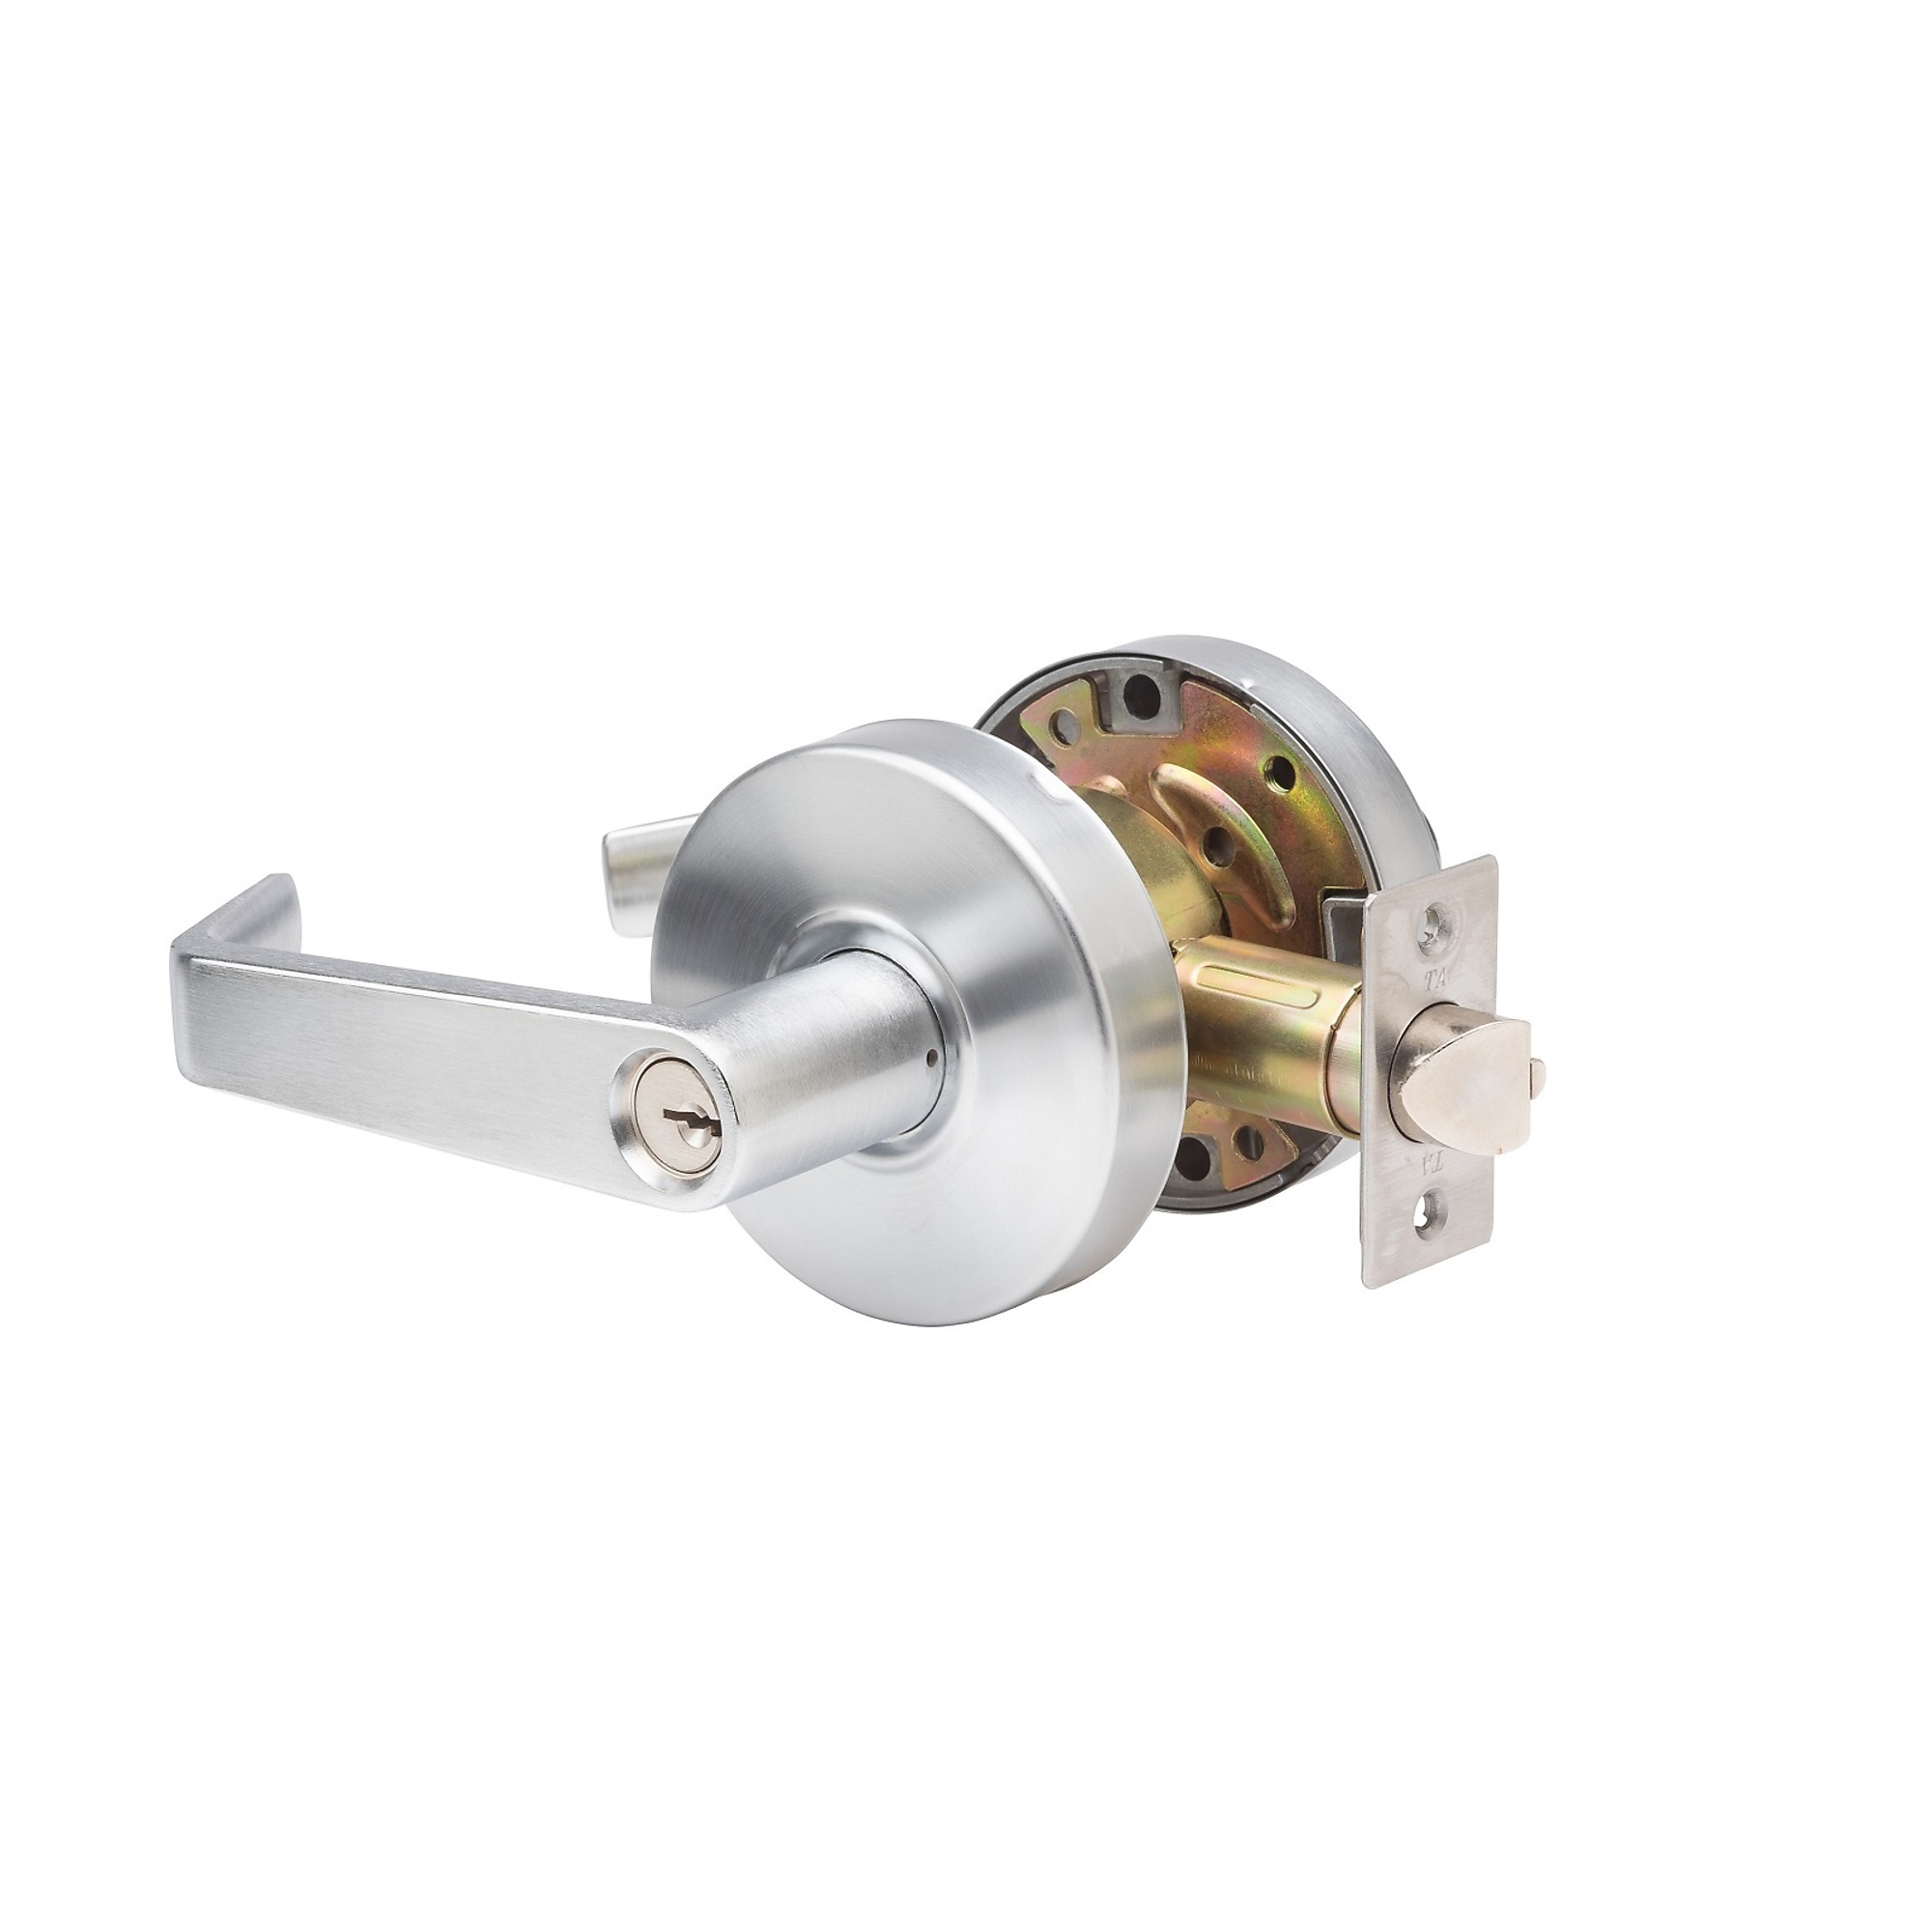 Trans Atlantic, Saturn Series Commercial Cylindrical Door Handle with Lock, Model DL-LSV80-US26D